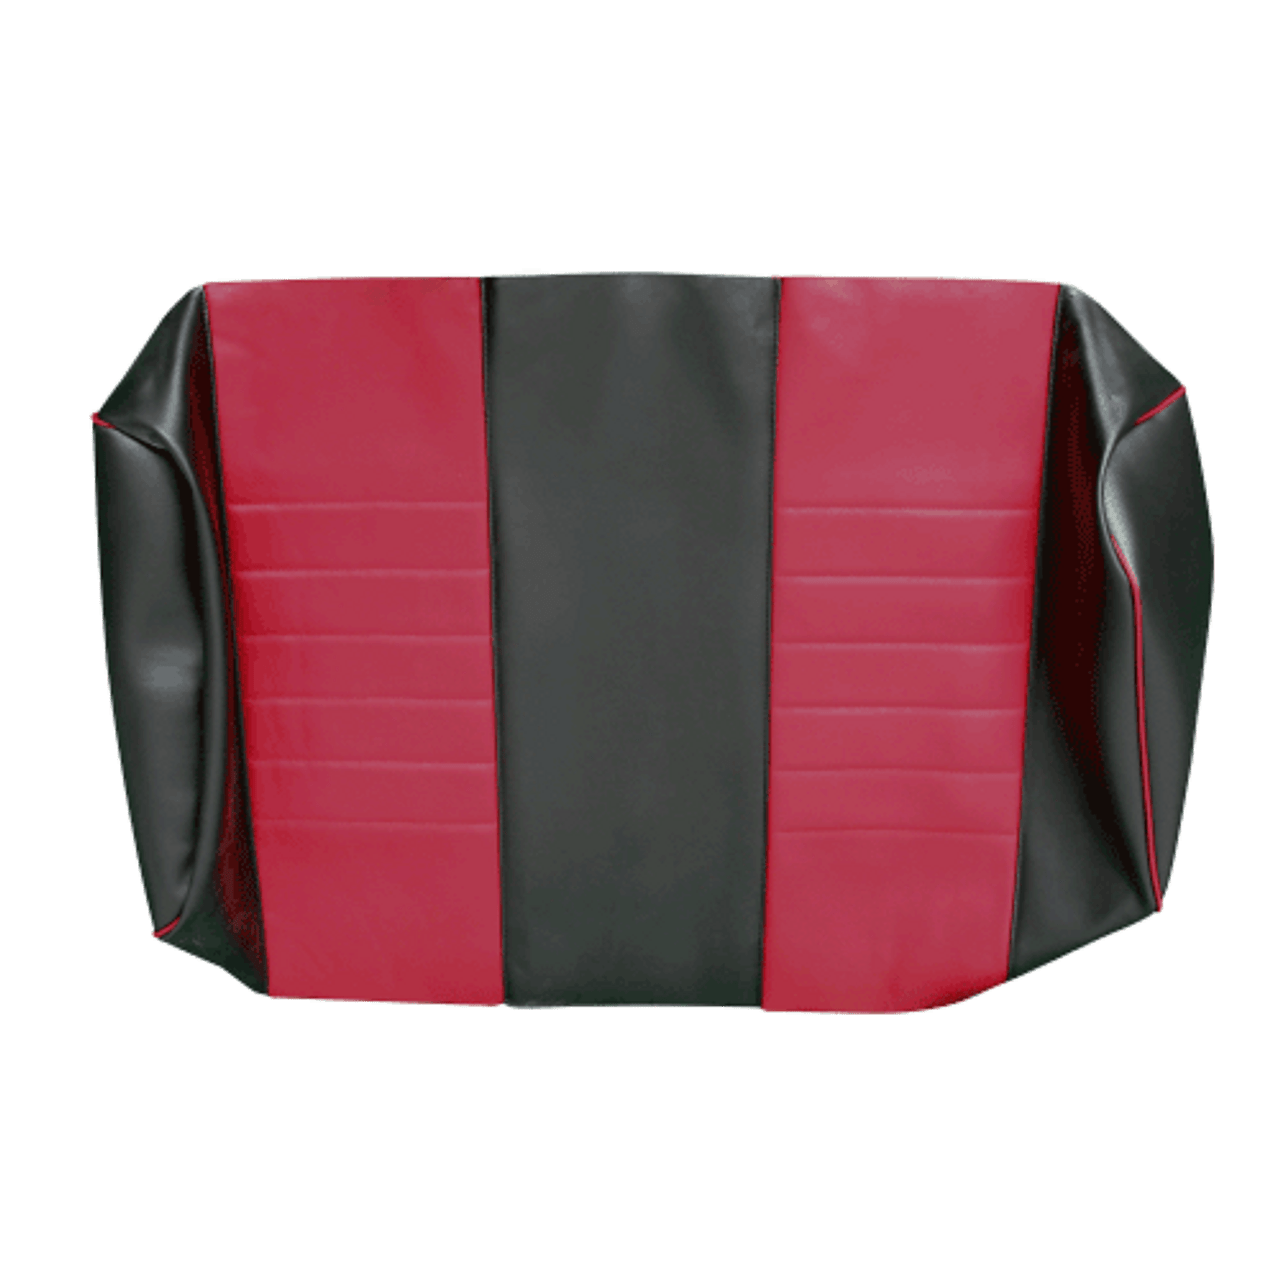 2.03.1084 SEAT BACK SKIN, CANDY APPLE RED & BLACK

On your purchase from Evolution Electric Vehicle, Evolution is your source for most extensive selection of golf cart parts and accessories in the industry.

Apply to (Vehicle Type）：

CLASSIC 2/4 PLUS PRO
CARRIER 6/8 PLUS
FORESTER 4/6 PLUS
TURFMAN 200/800/1000